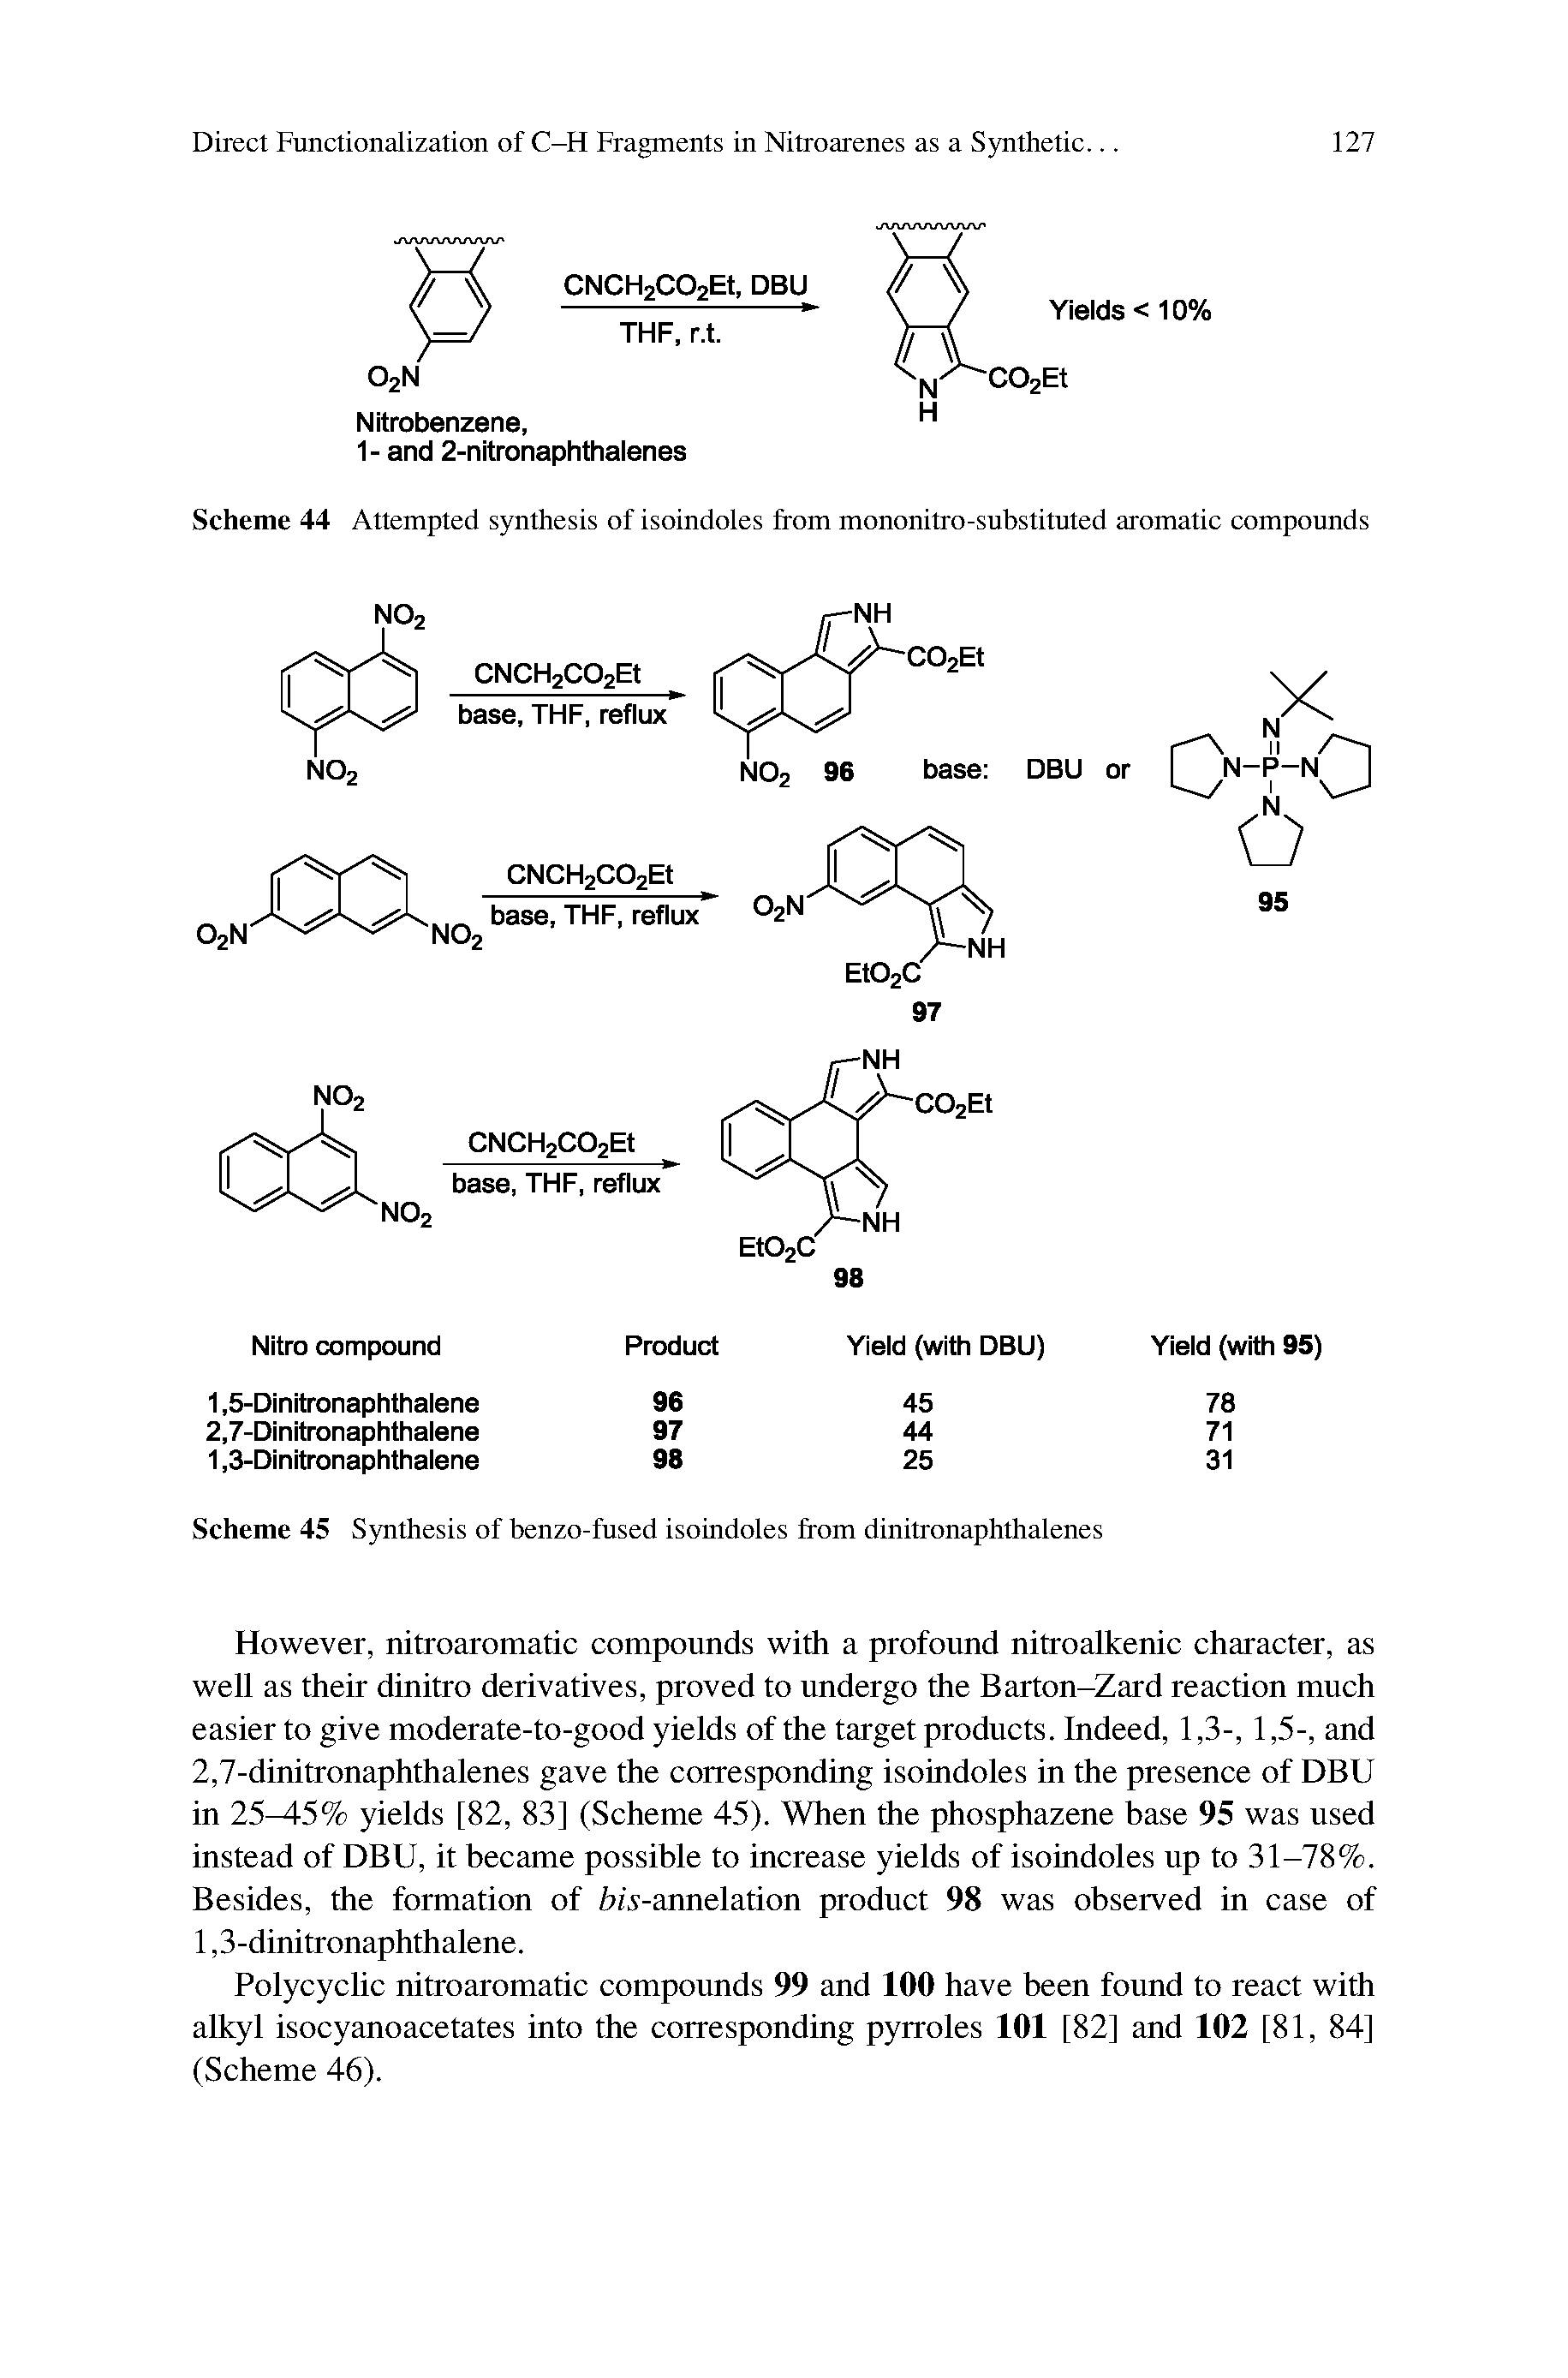 Scheme 44 Attempted synthesis of isoindoles from mononitro-substituted aromatic compounds...